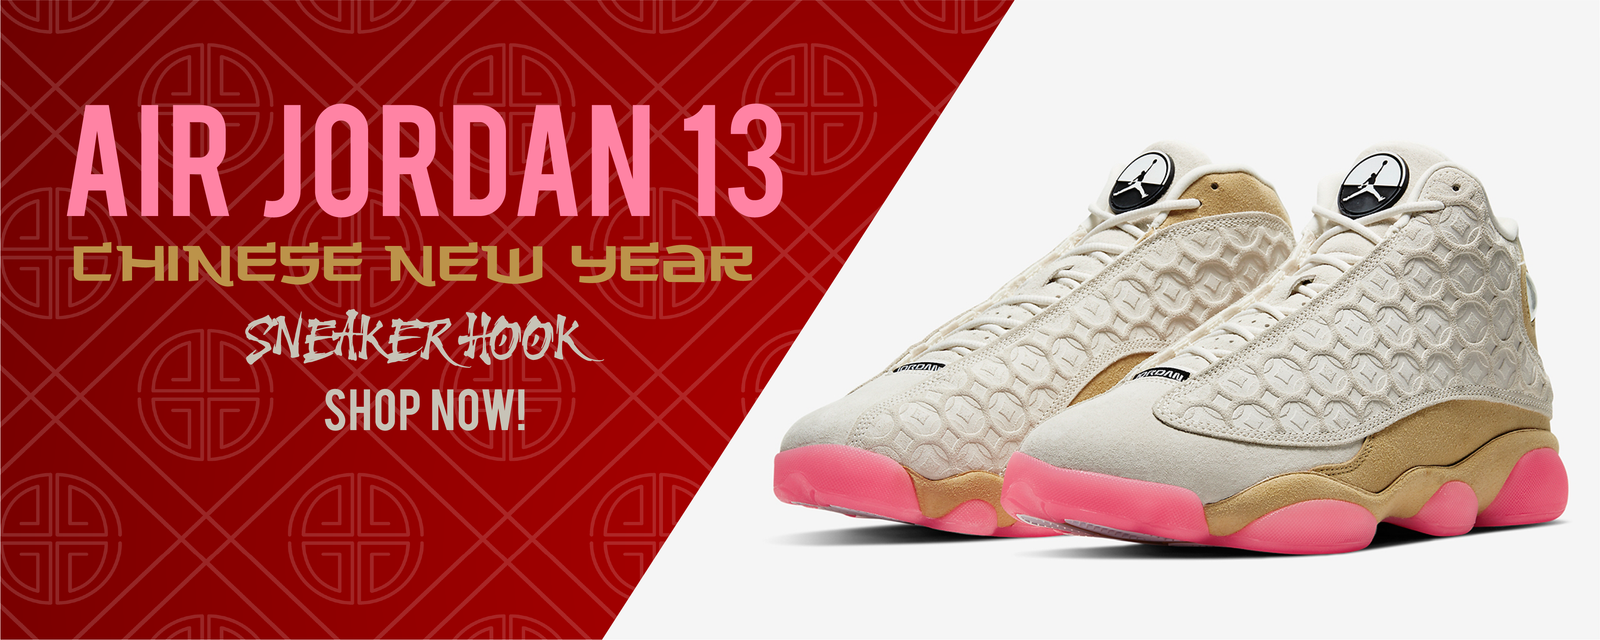 jordan retro 13 chinese new year outfit